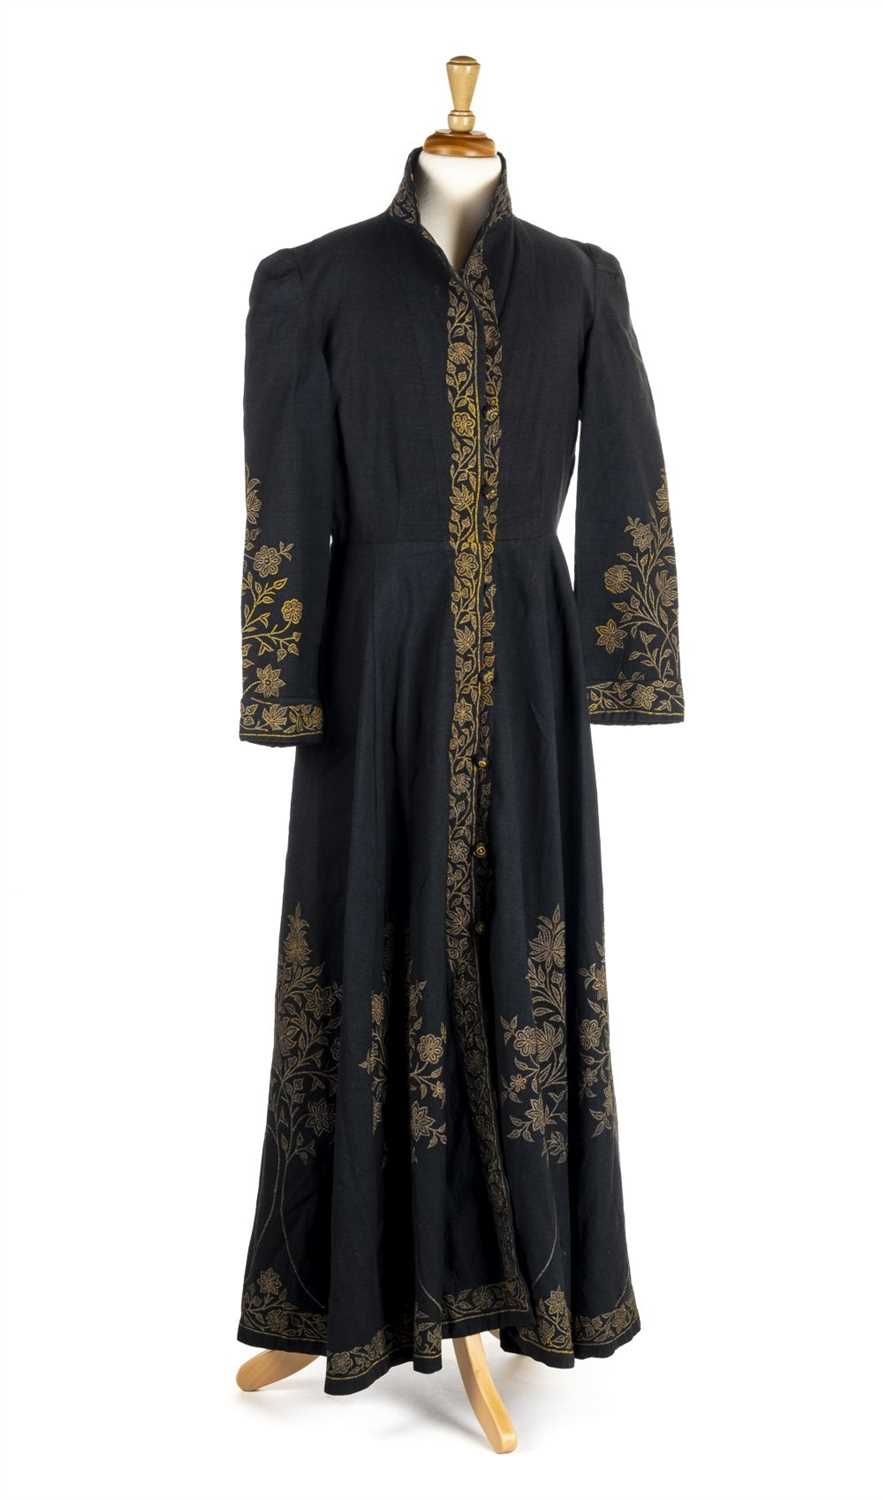 Lot 151 - Embroidered coat. A long coat with metallic embroidery, early 20th century